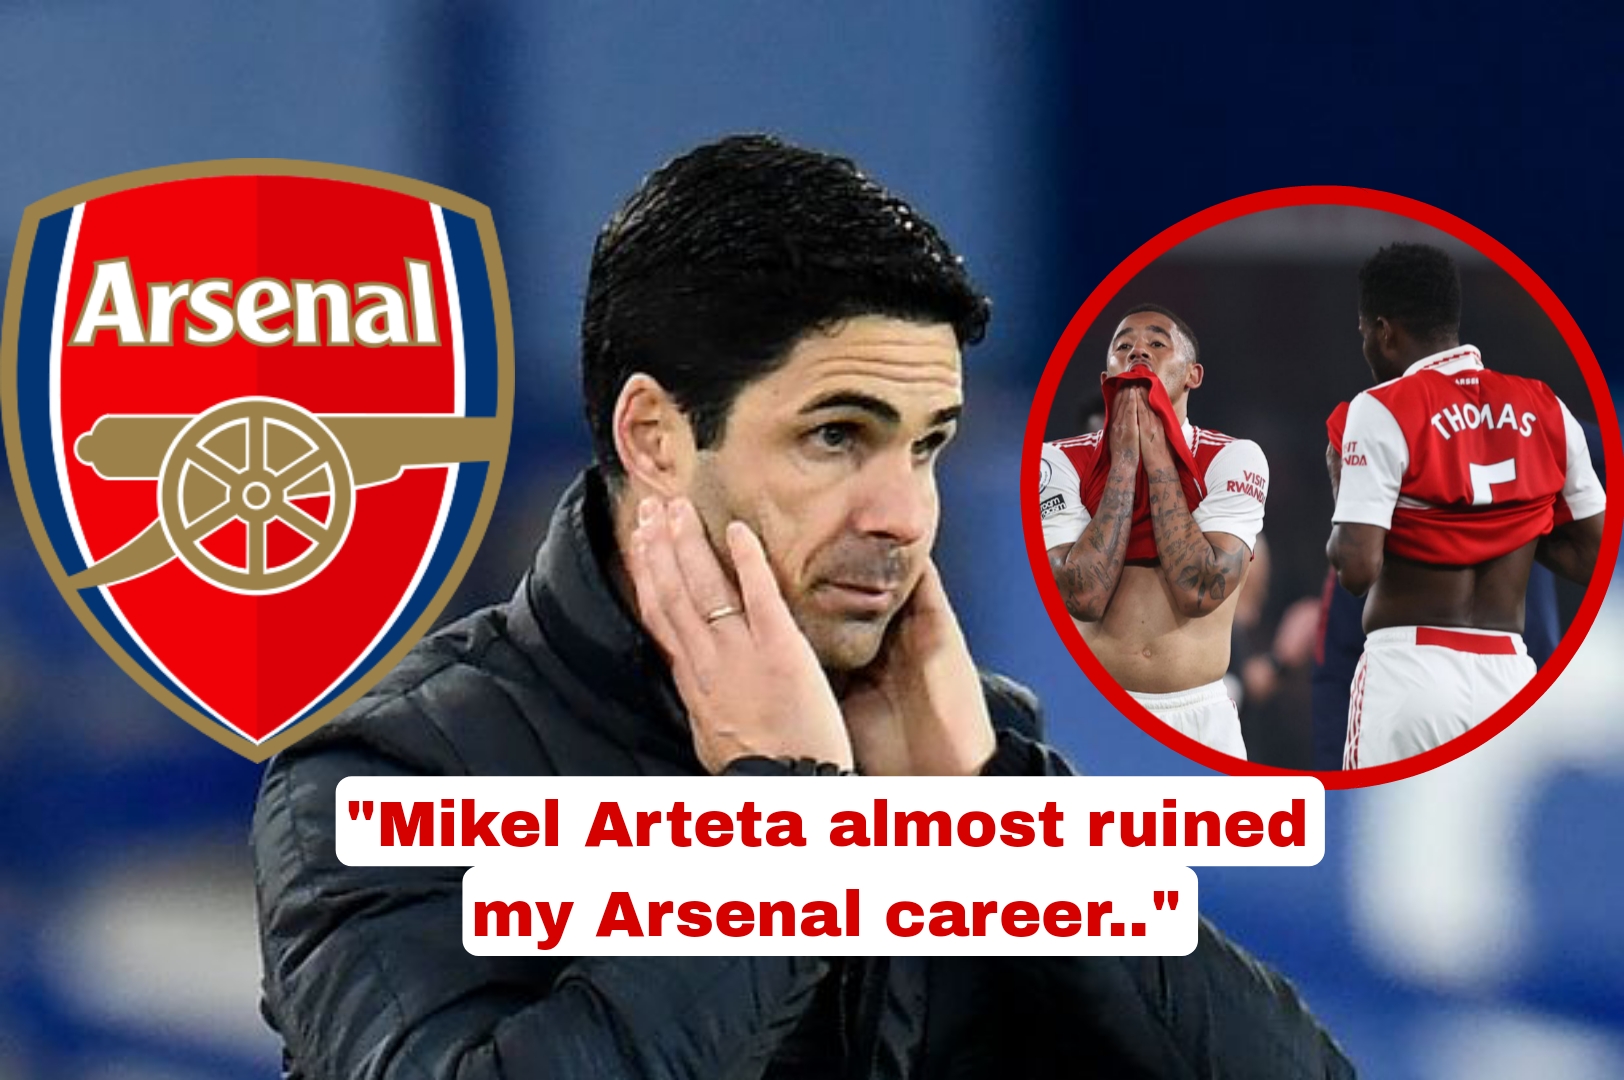 “Stop wasting your talent at that club”; Premier League legend tells Arsenal star he has ‘no future’ under Mikel Arteta and must leave the club this month